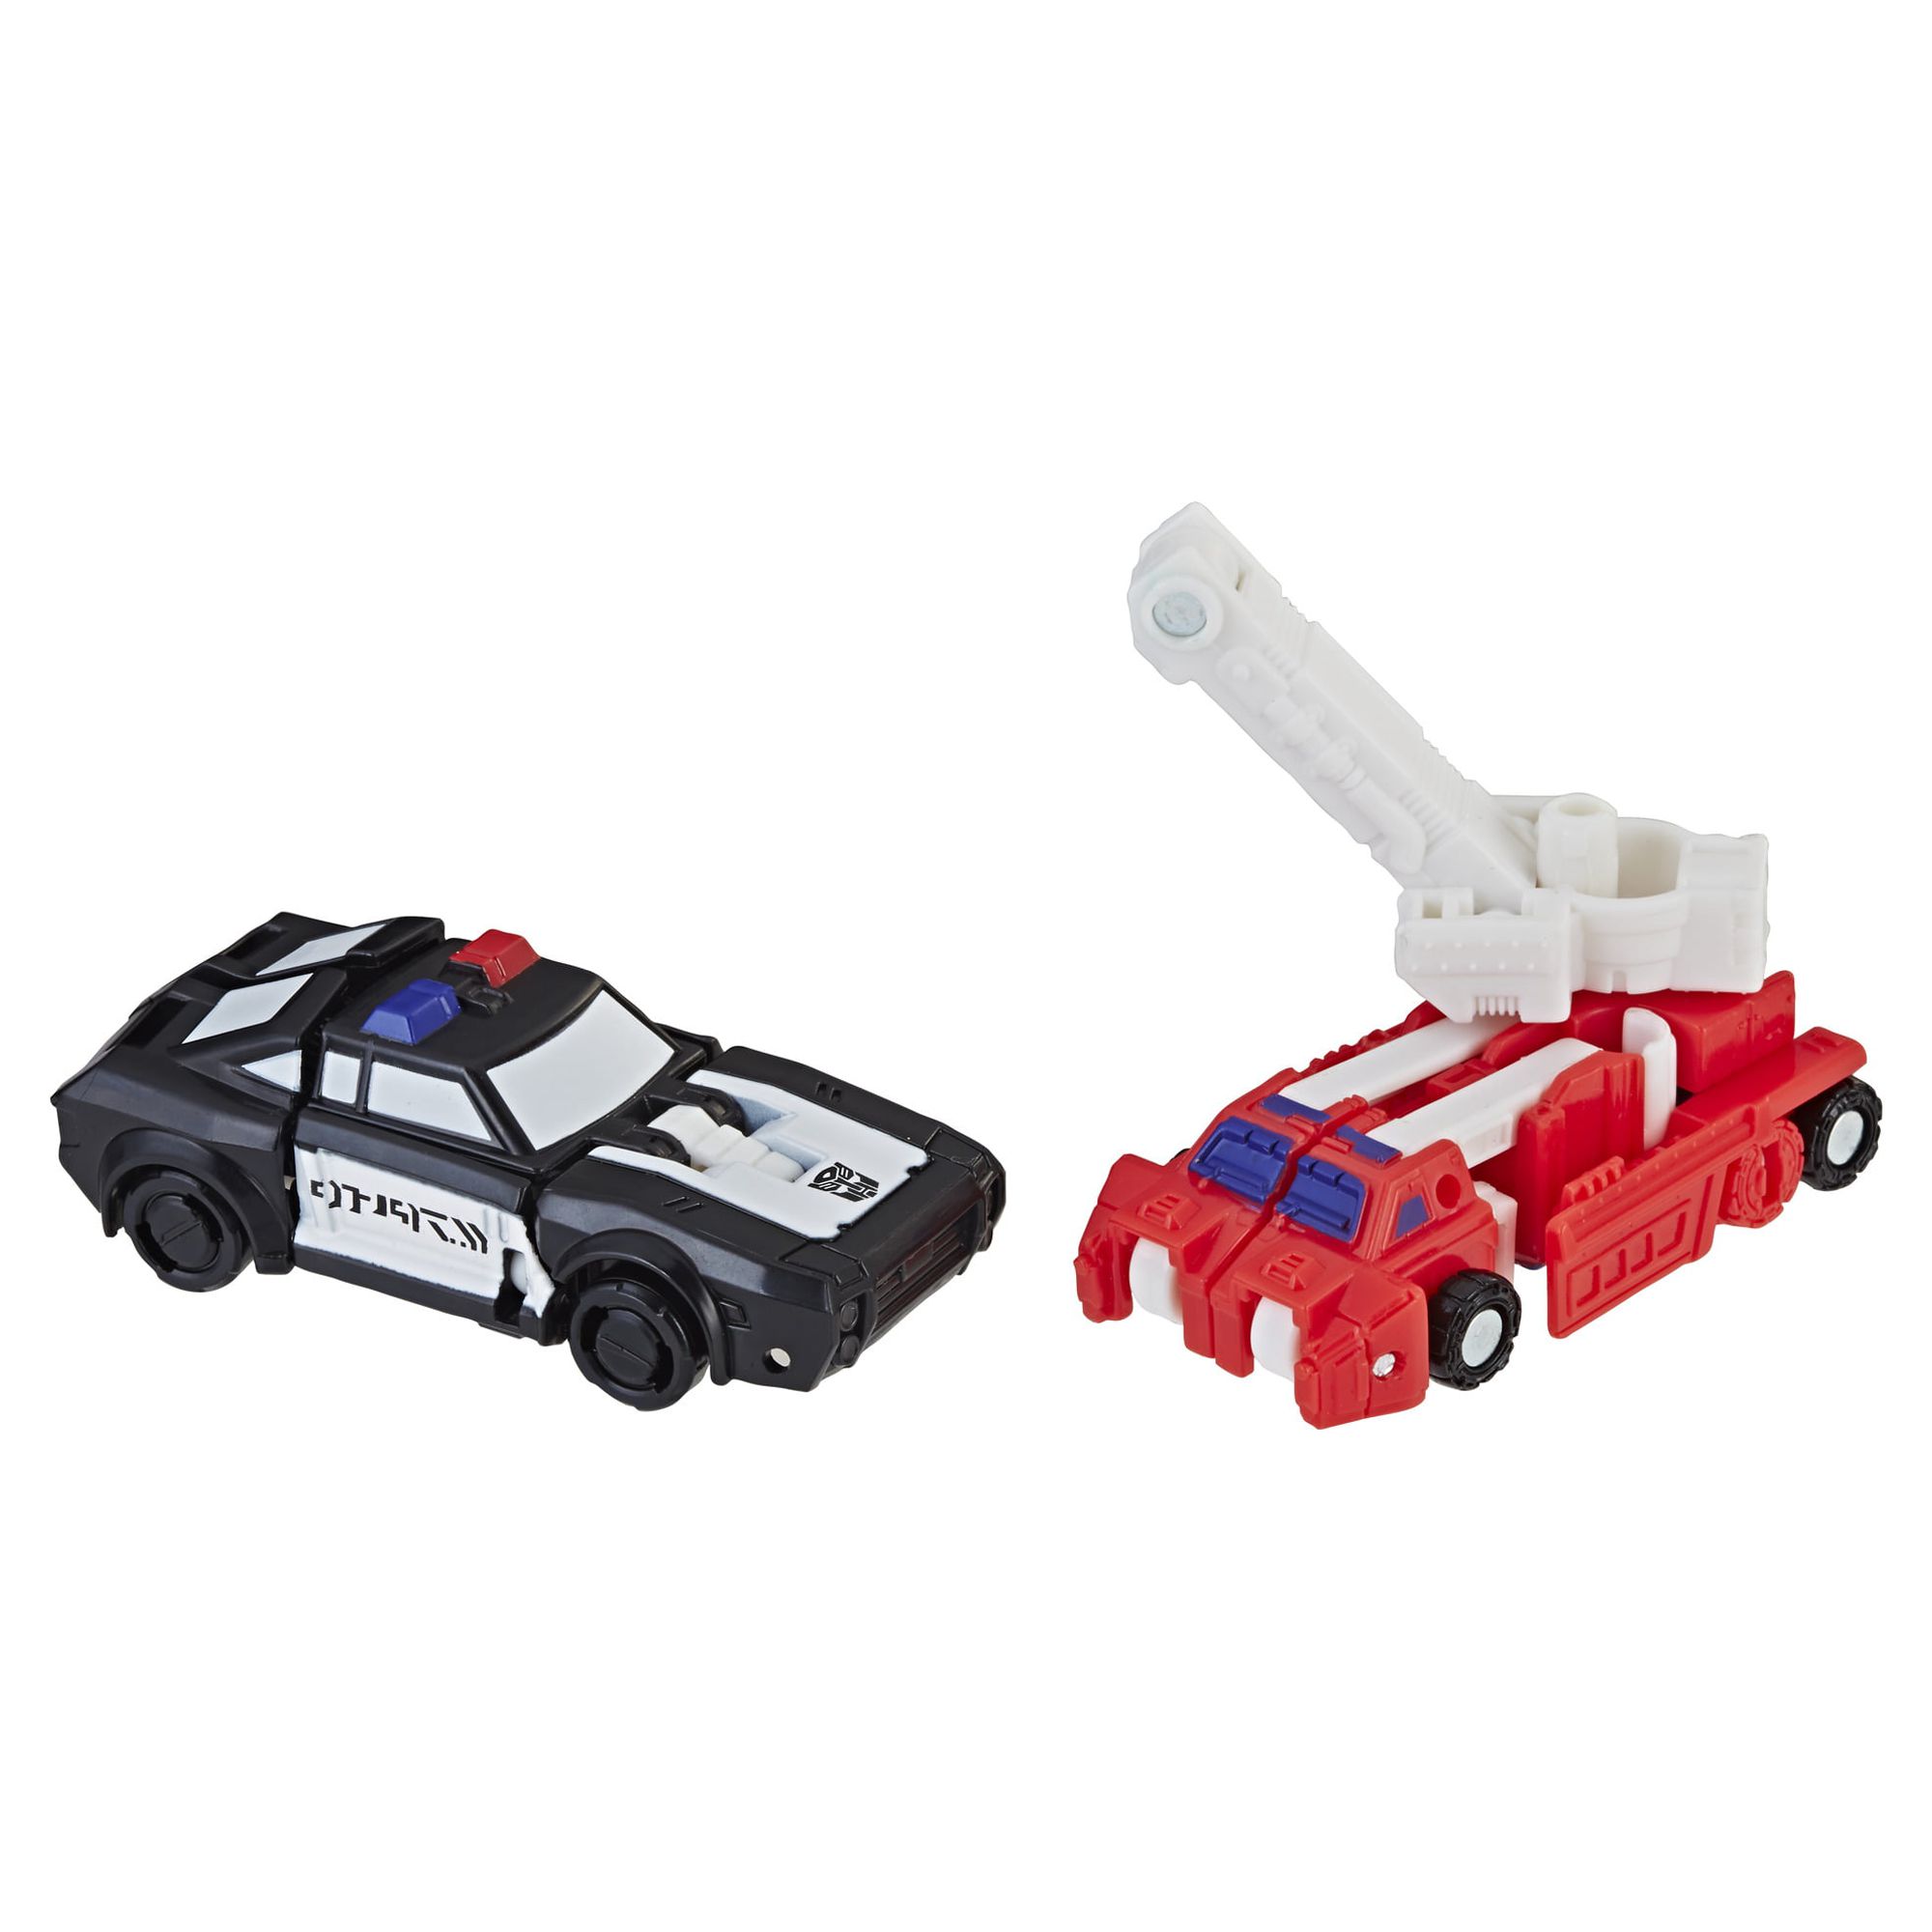 Transformers Generations: Siege Micromaster and Autobot Rescue Patrol Figures - image 3 of 3